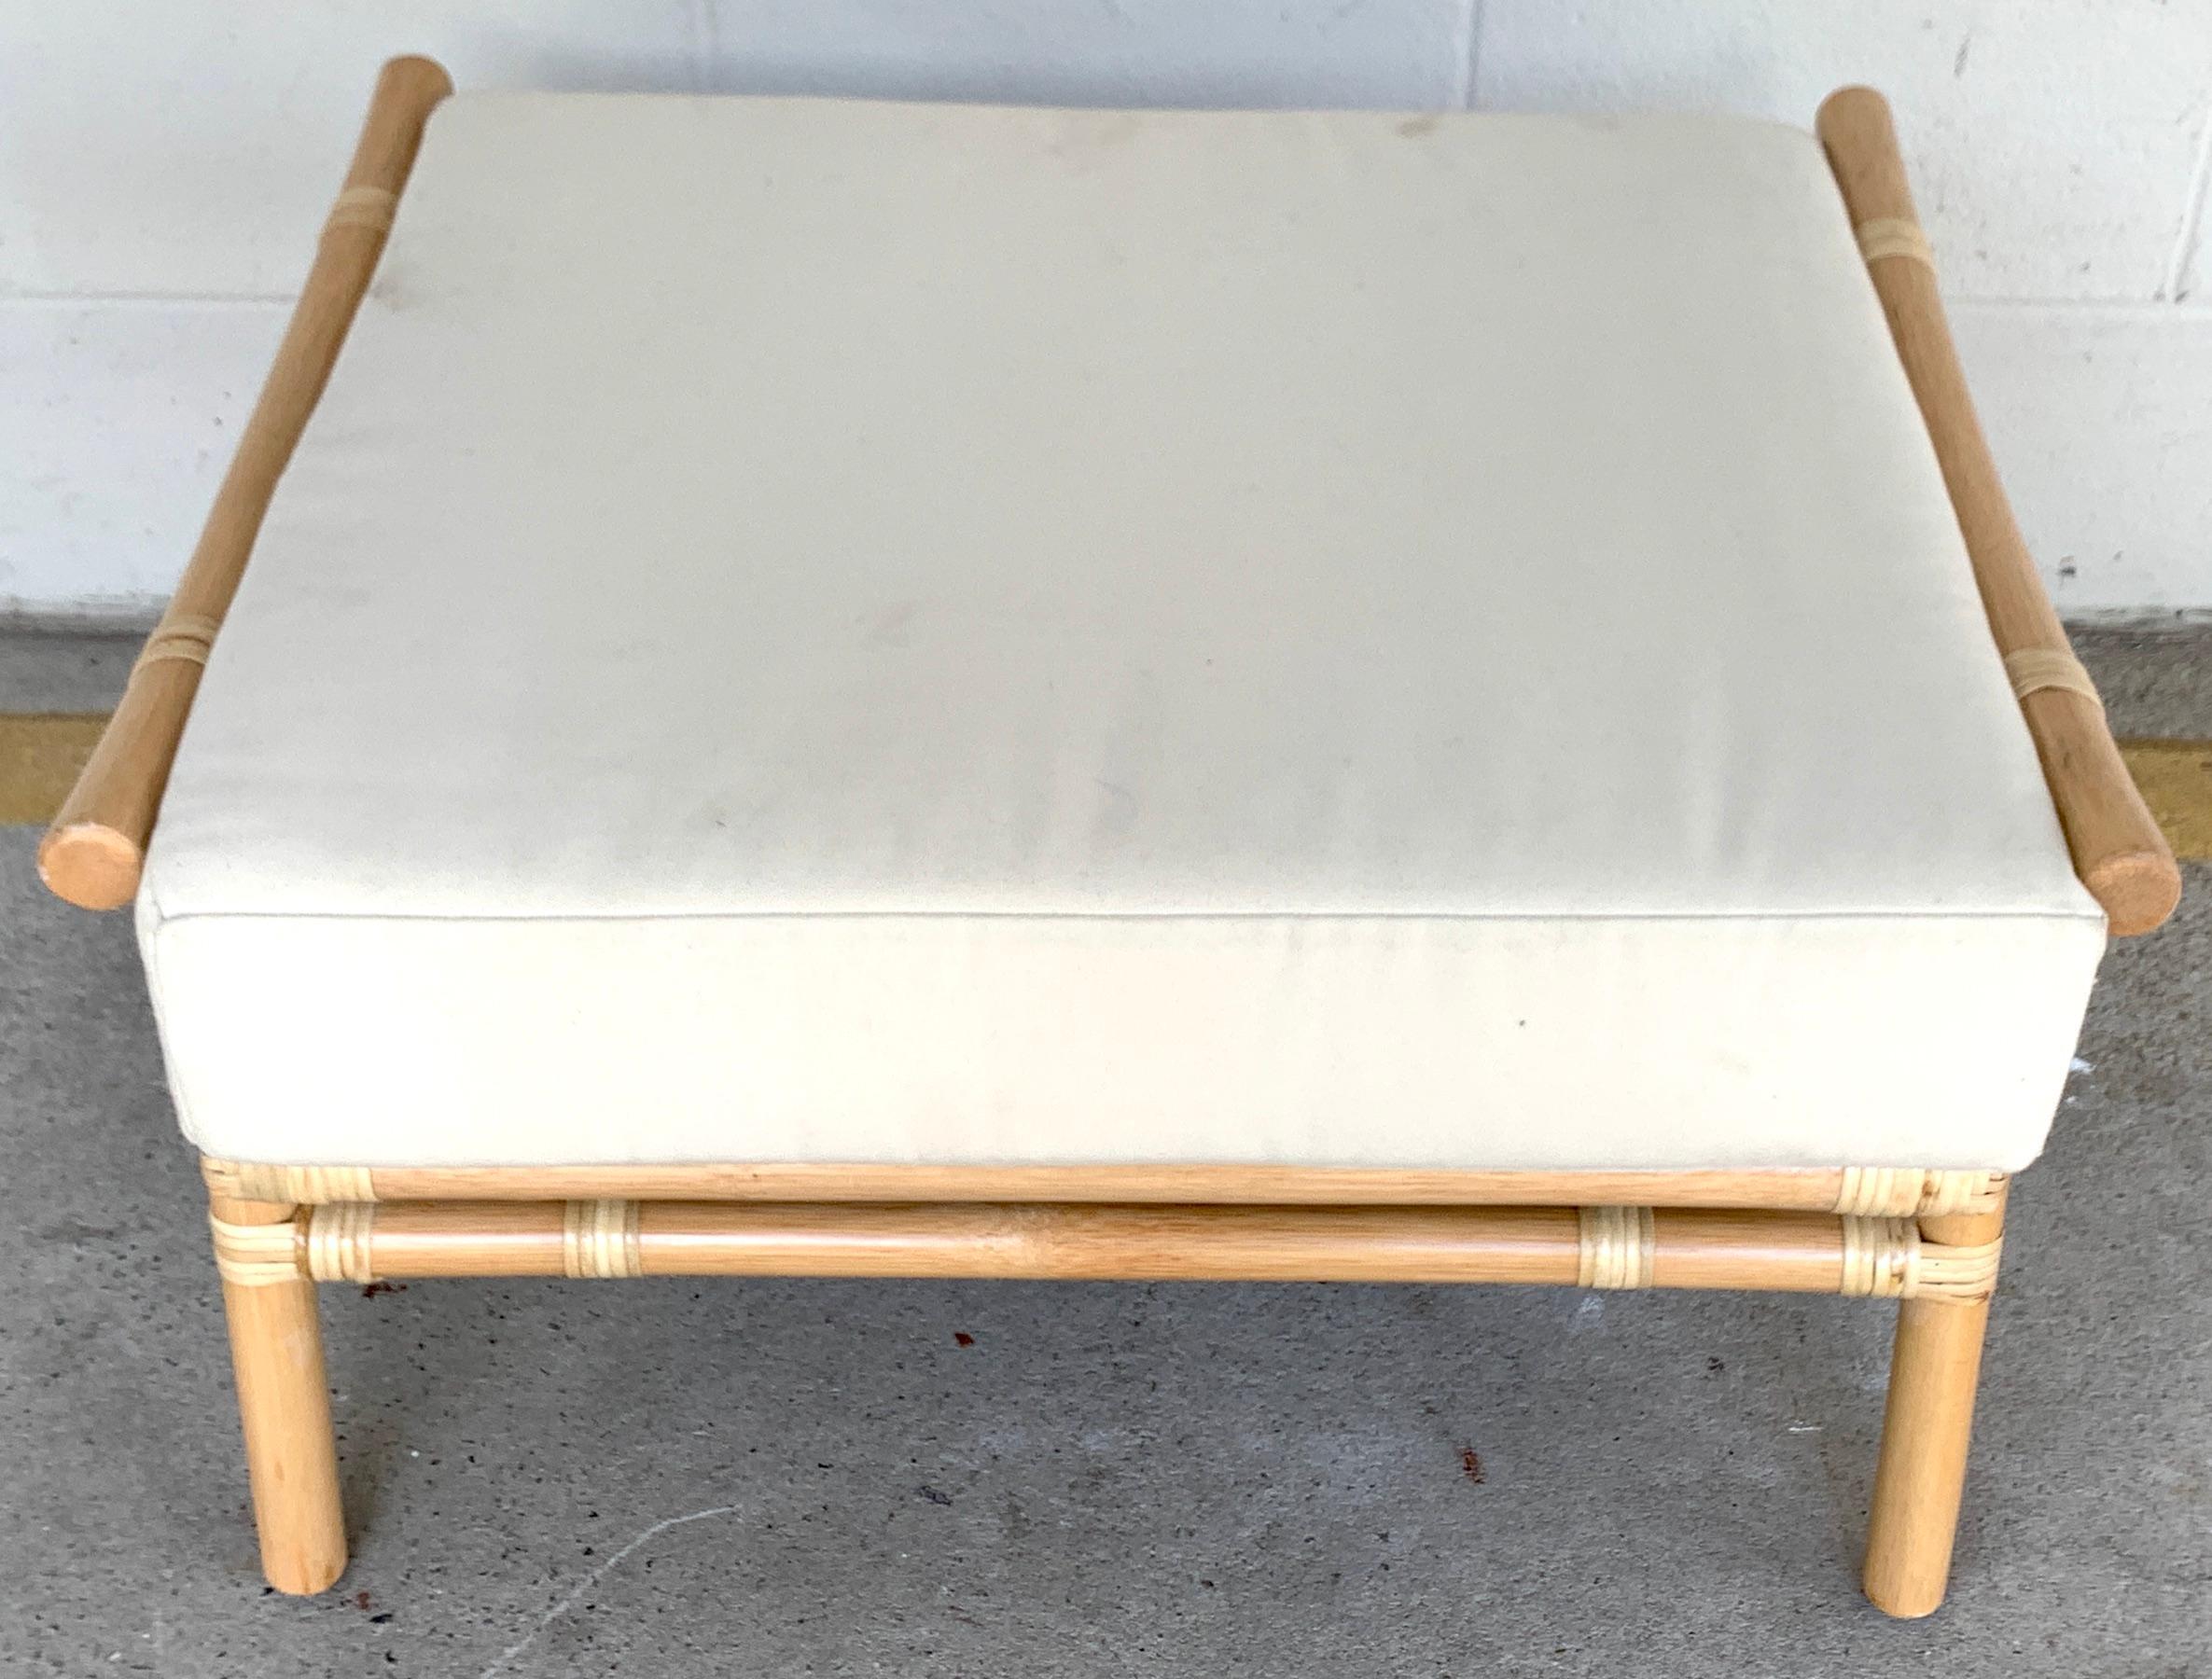 Ficks Reed natural rattan ottoman by John Wisner, Restored
With beautiful natural finish, sturdy construction Complete with muslin template cushion. The cushion is useable, shows some wear, ready for COM.
The height without the cushion is 13